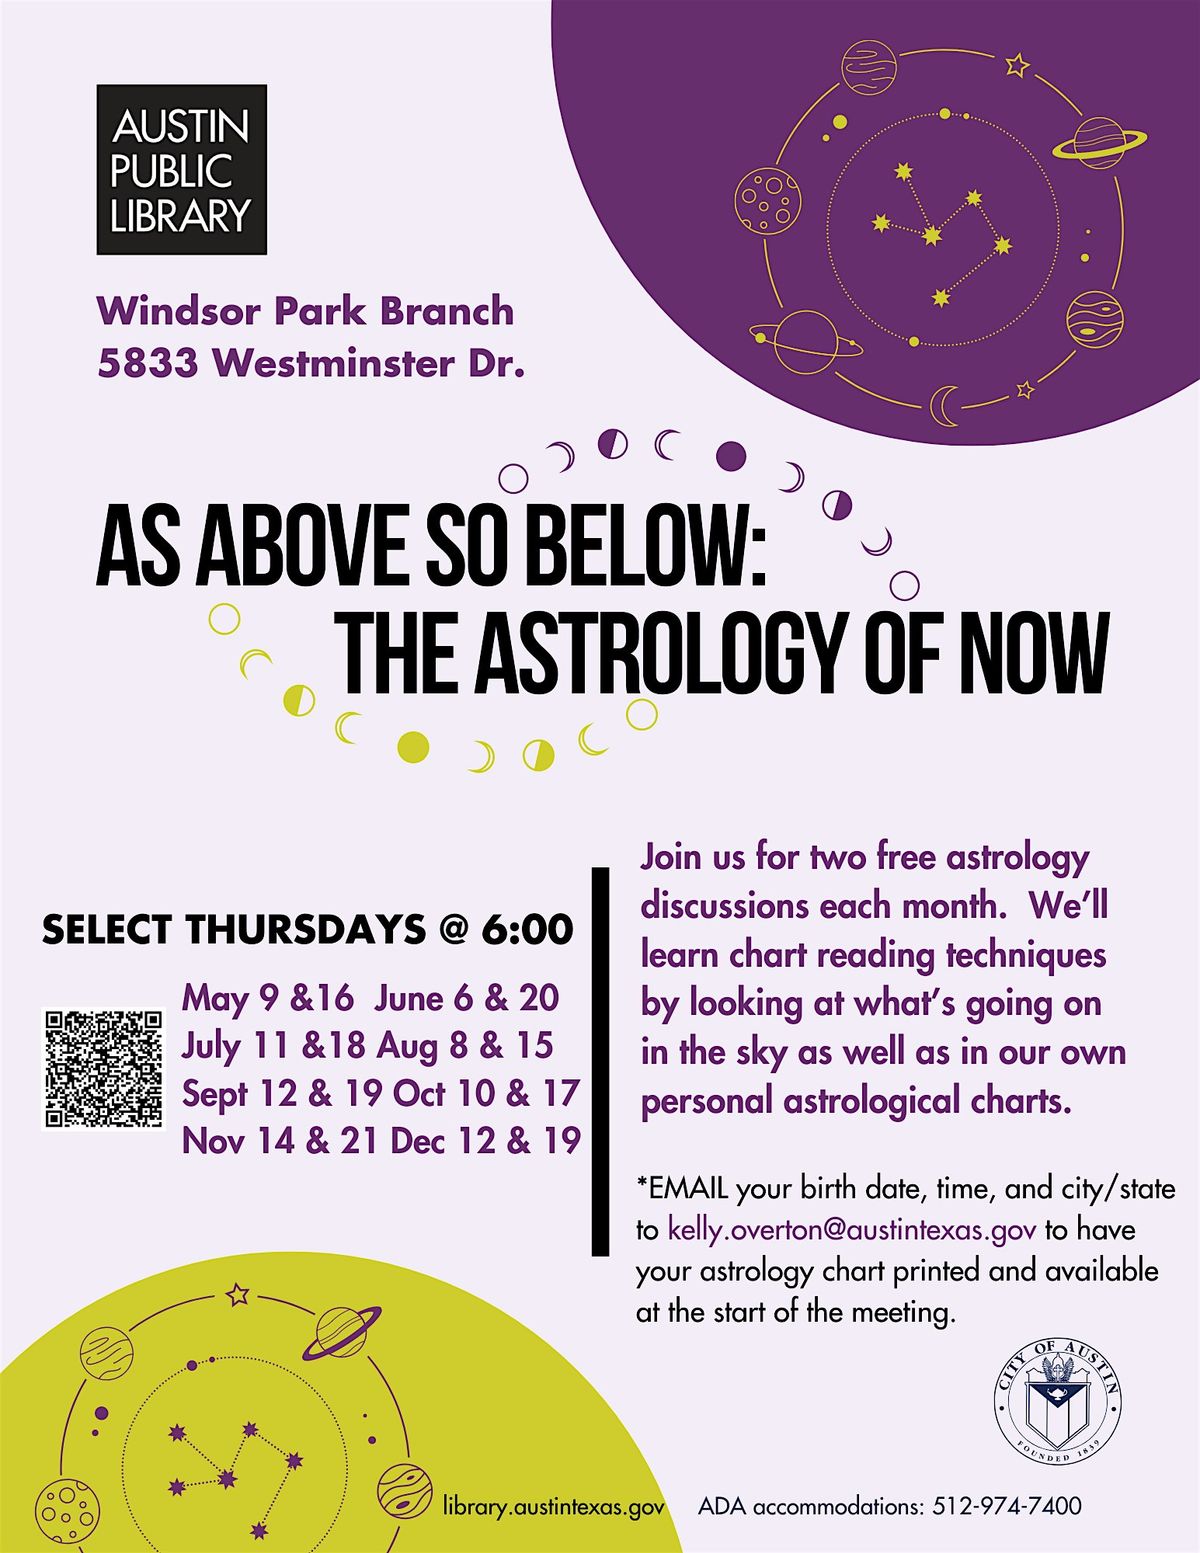 Astrology of Now: Free Astrology Class and Discussion @ the Library